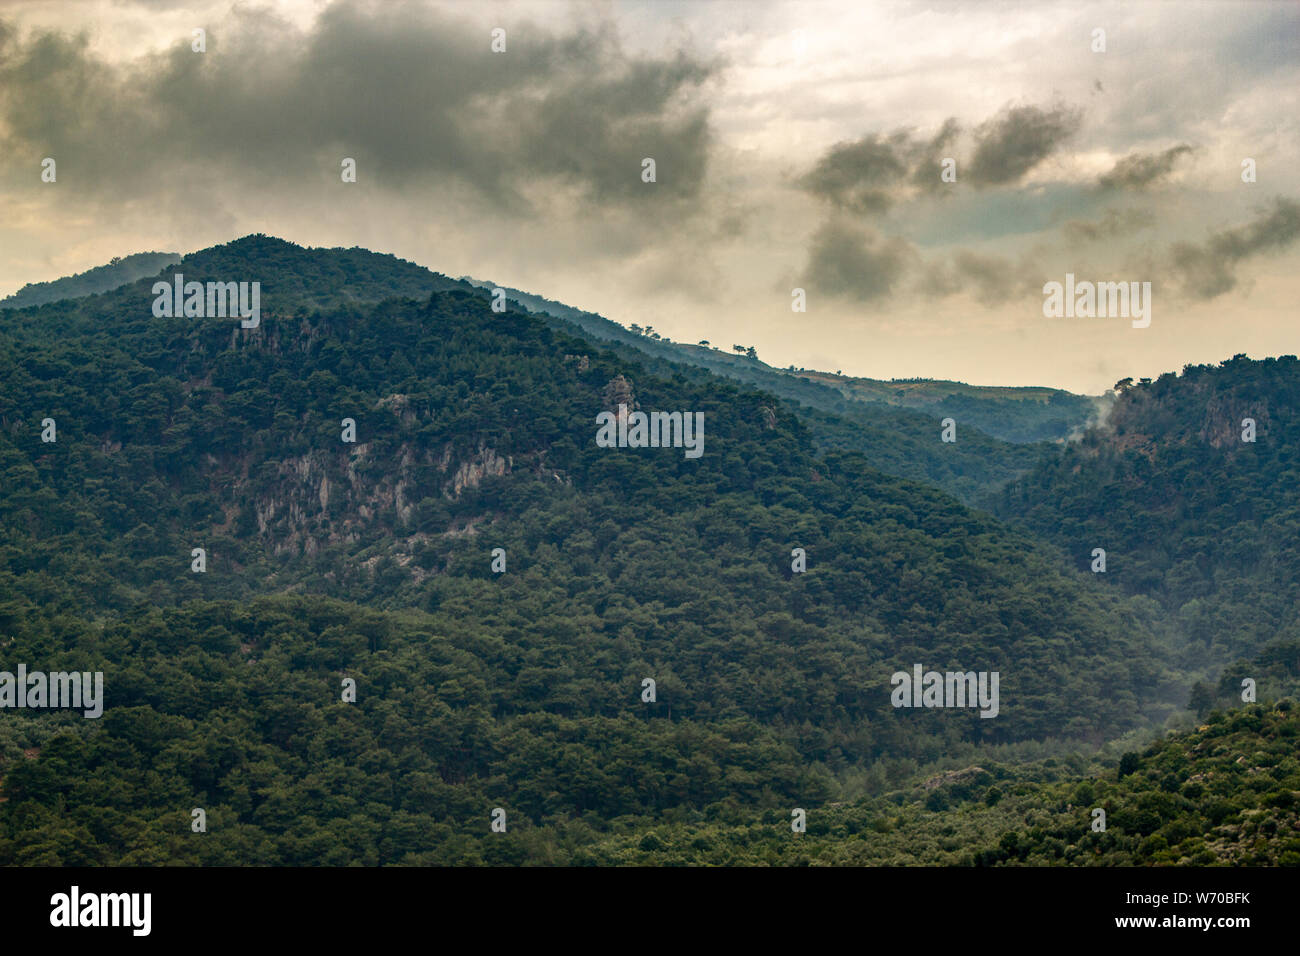 Foggy and cloudy mountainous forest landscape Stock Photo